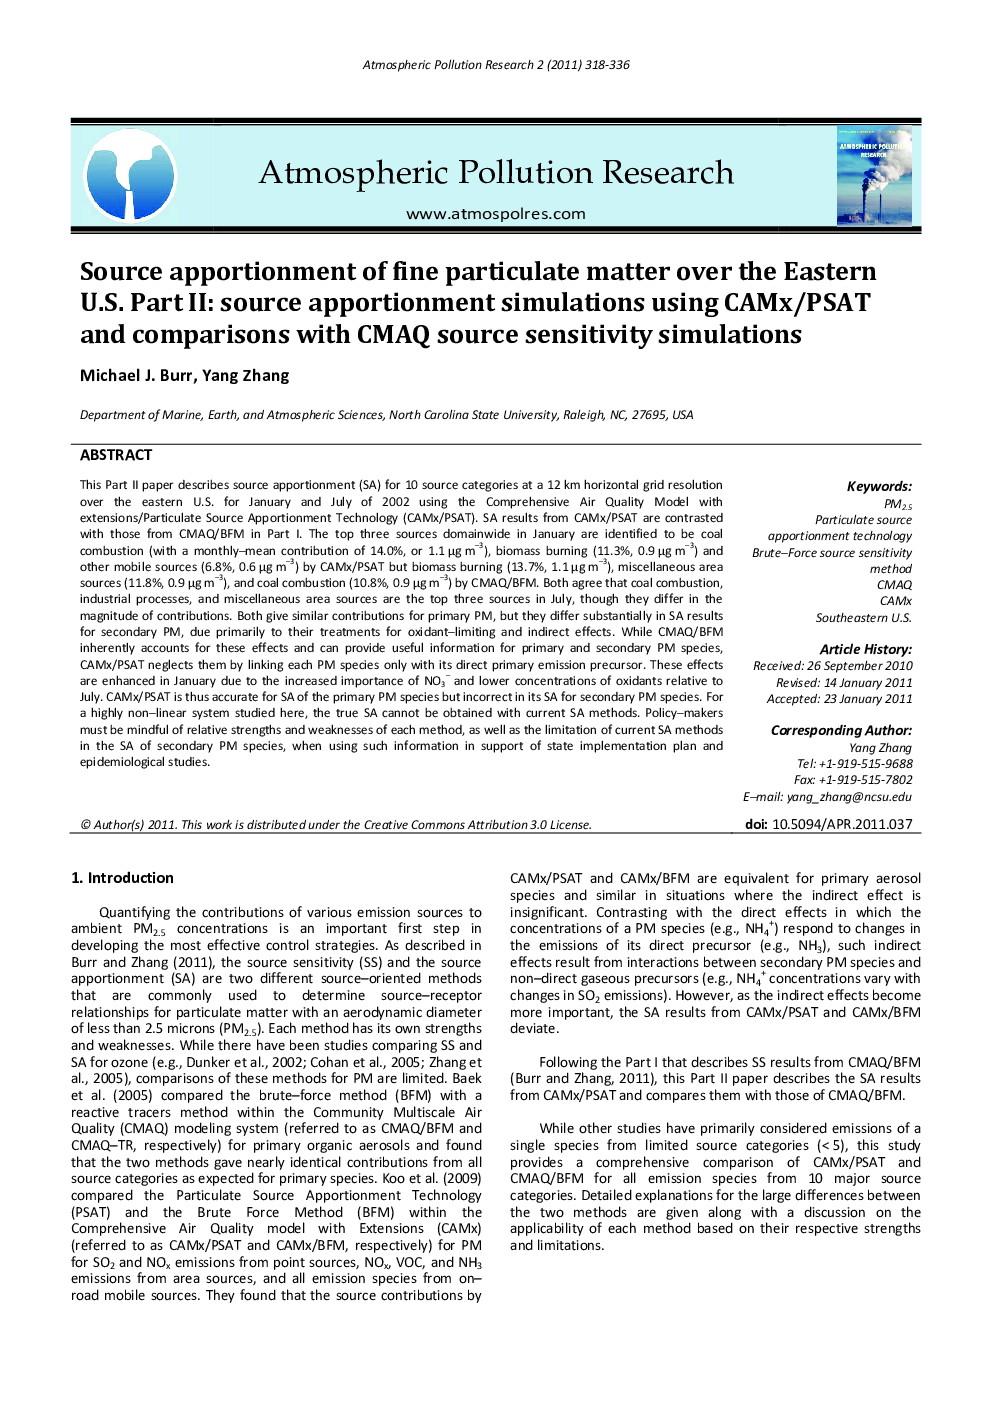 Source apportionment of fine particulate matter over the Eastern U.S. Part II: source apportionment simulations using CAMx/PSAT and comparisons with CMAQ source sensitivity simulations